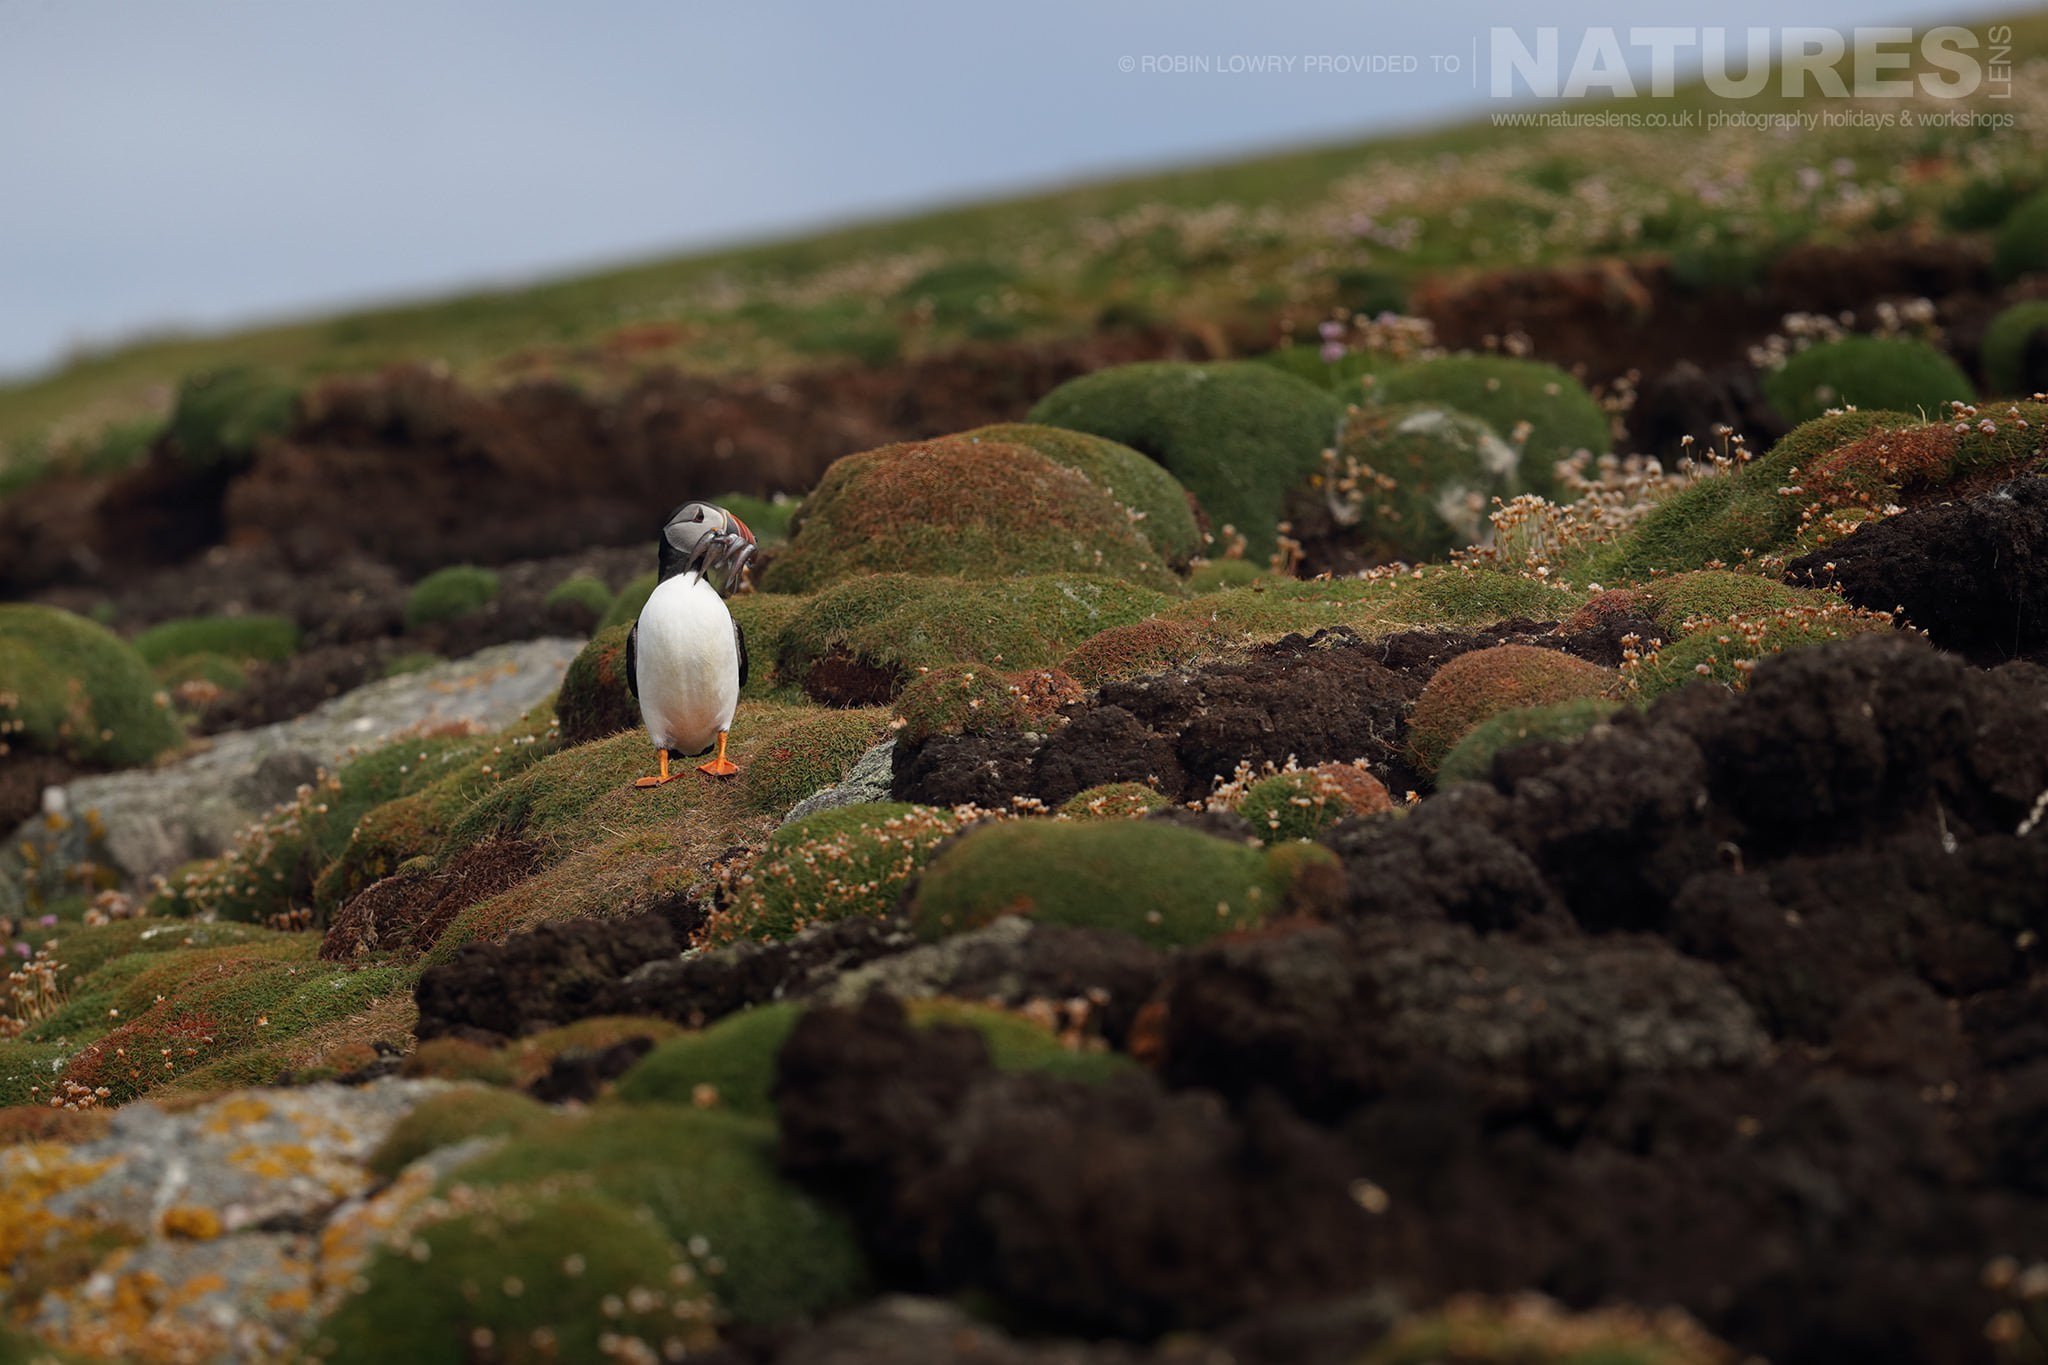 One of the Puffins of Fair Isle returns to the nest with a beak full of sand eels - this image was captured during the NaturesLens Atlantic Puffins of Fair Isle photography holiday